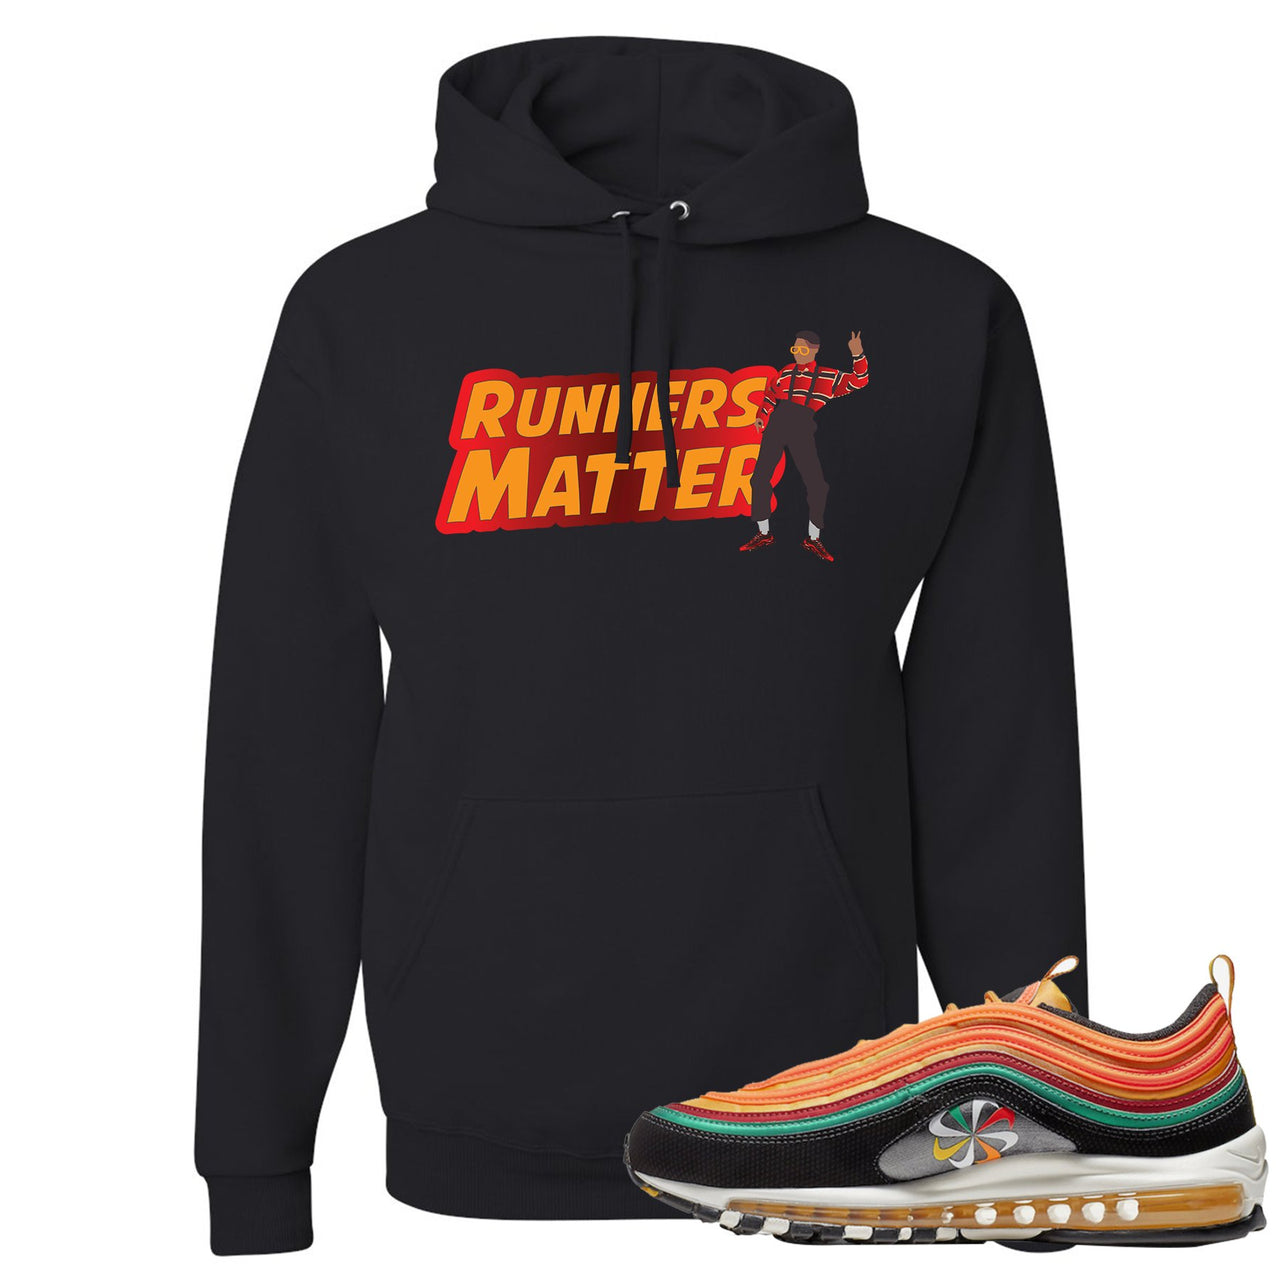 Printed on the front of the Air Max 97 Sunburst black sneaker matching pullover hoodie is the Runners Matter logo